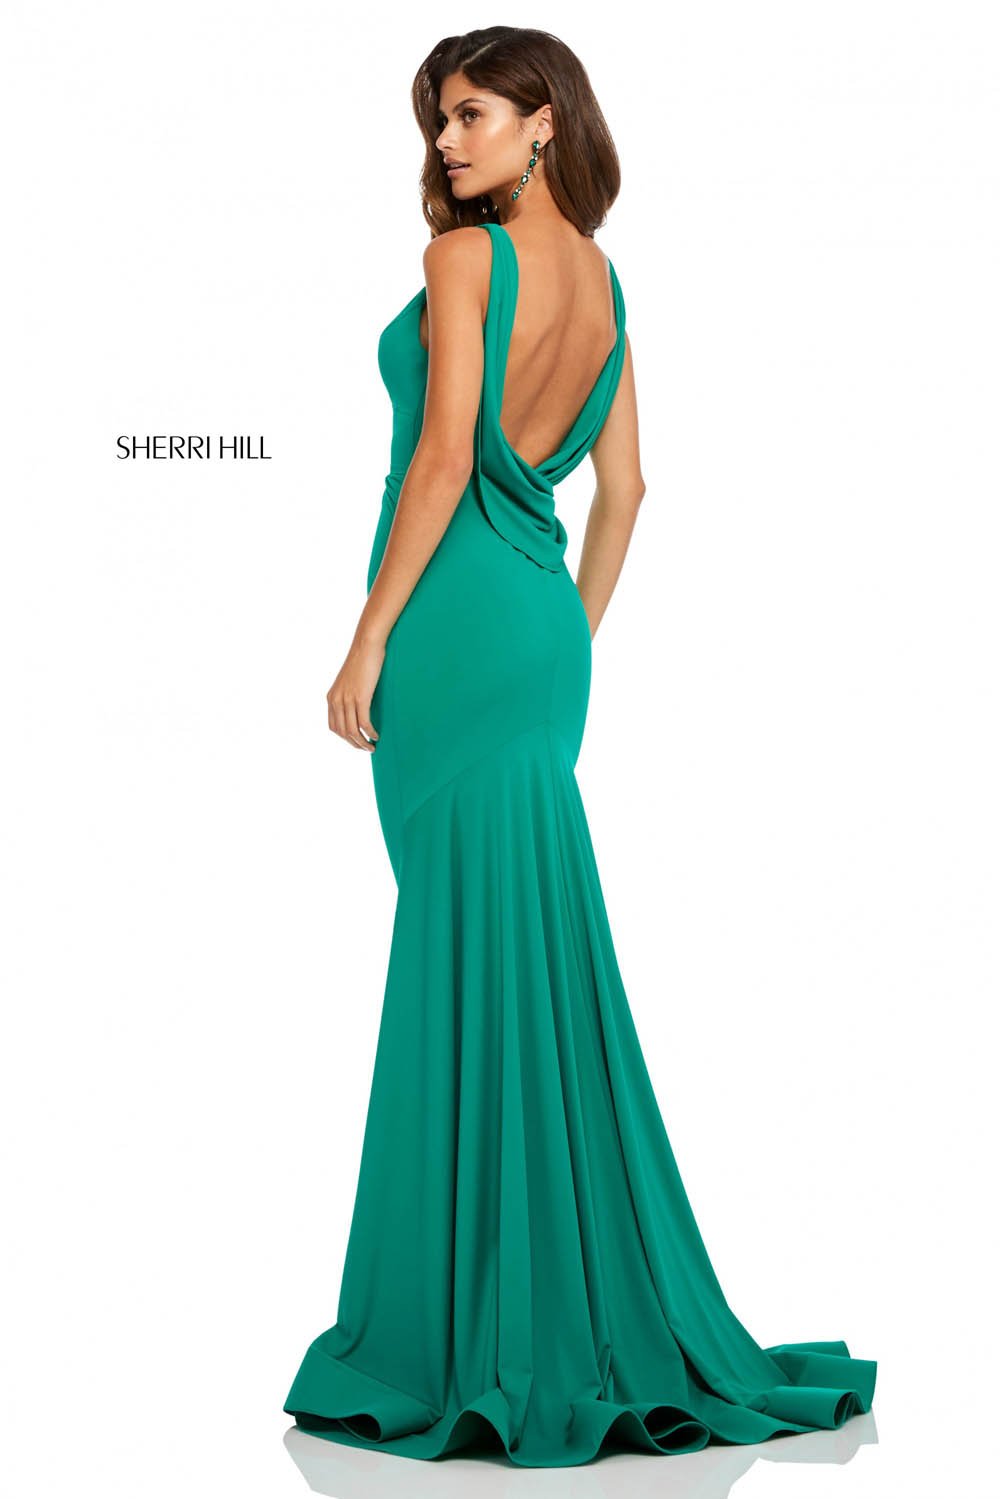 Sherri Hill 52790 dress images in these colors: Purple, Navy, Royal, Yellow, Fuchsia, Black, Emerald.